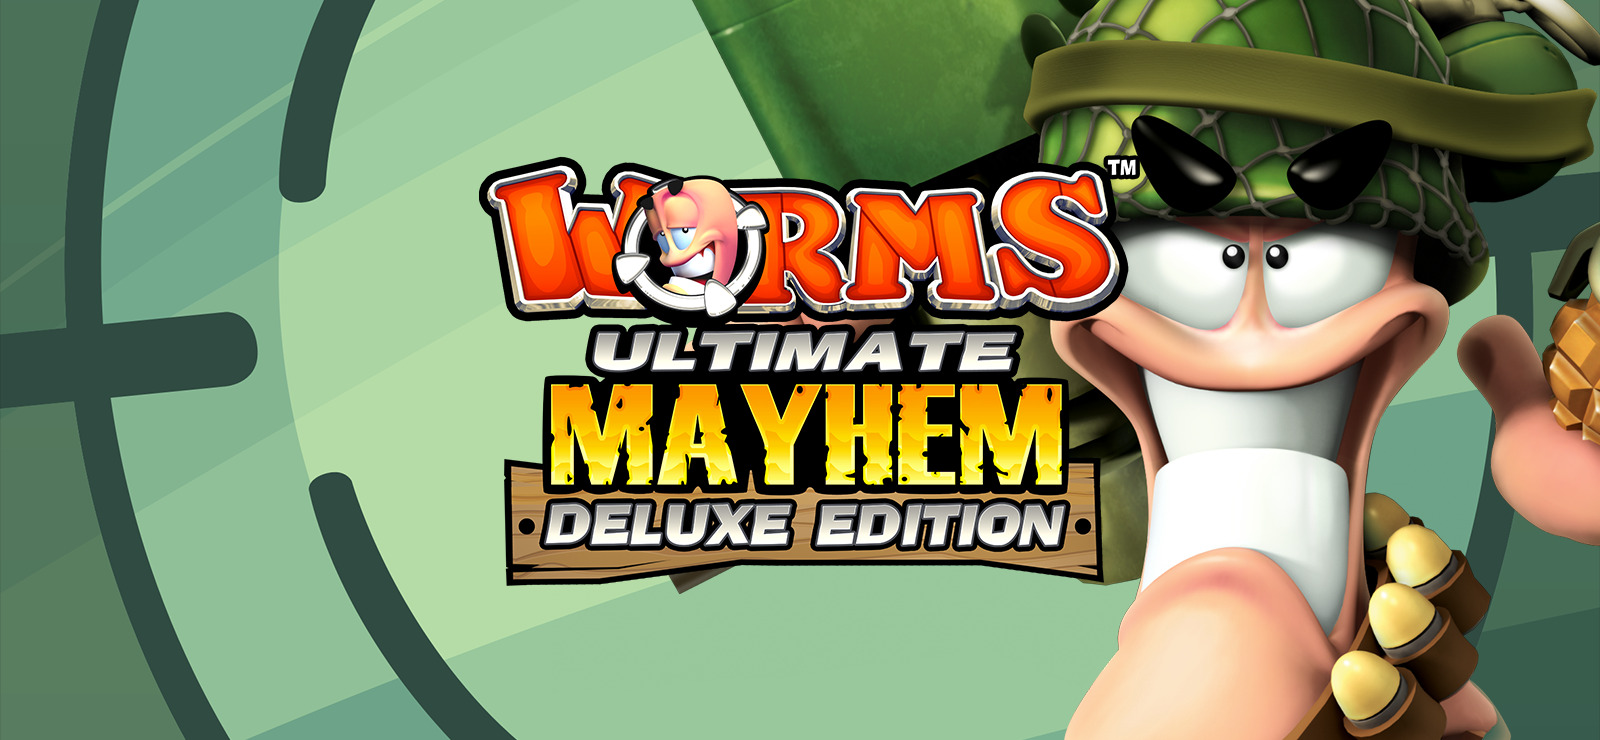 Worms steam фото 43